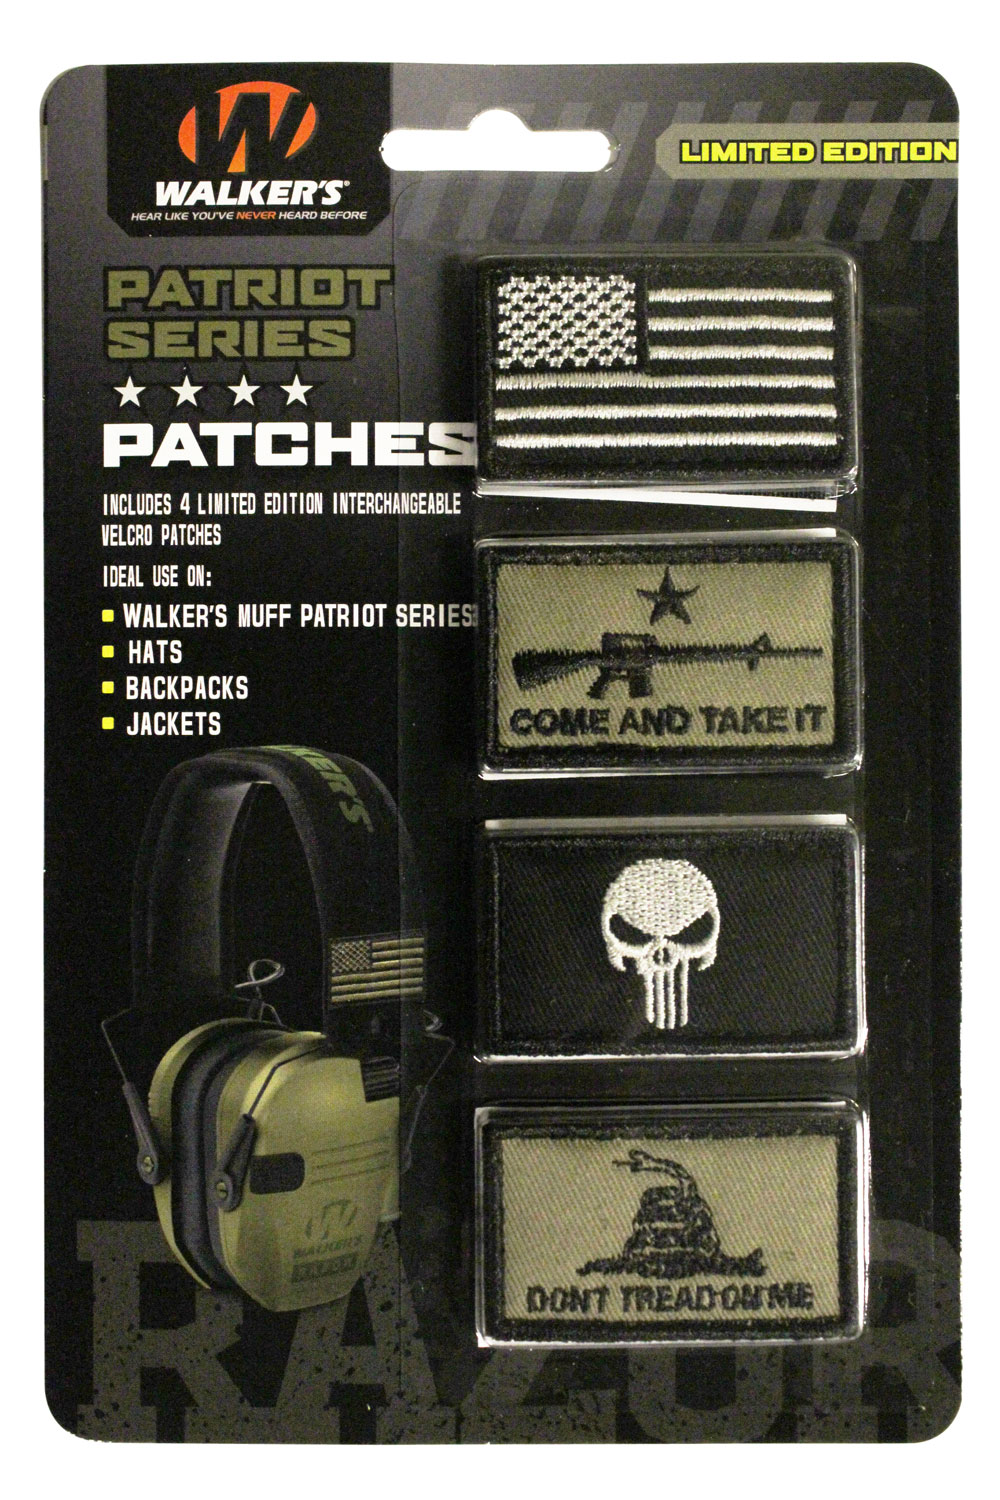 WALKERS PATRIOT PATCH KIT FOR PATRIOT MUFF AMERICAN FLAG 4PC